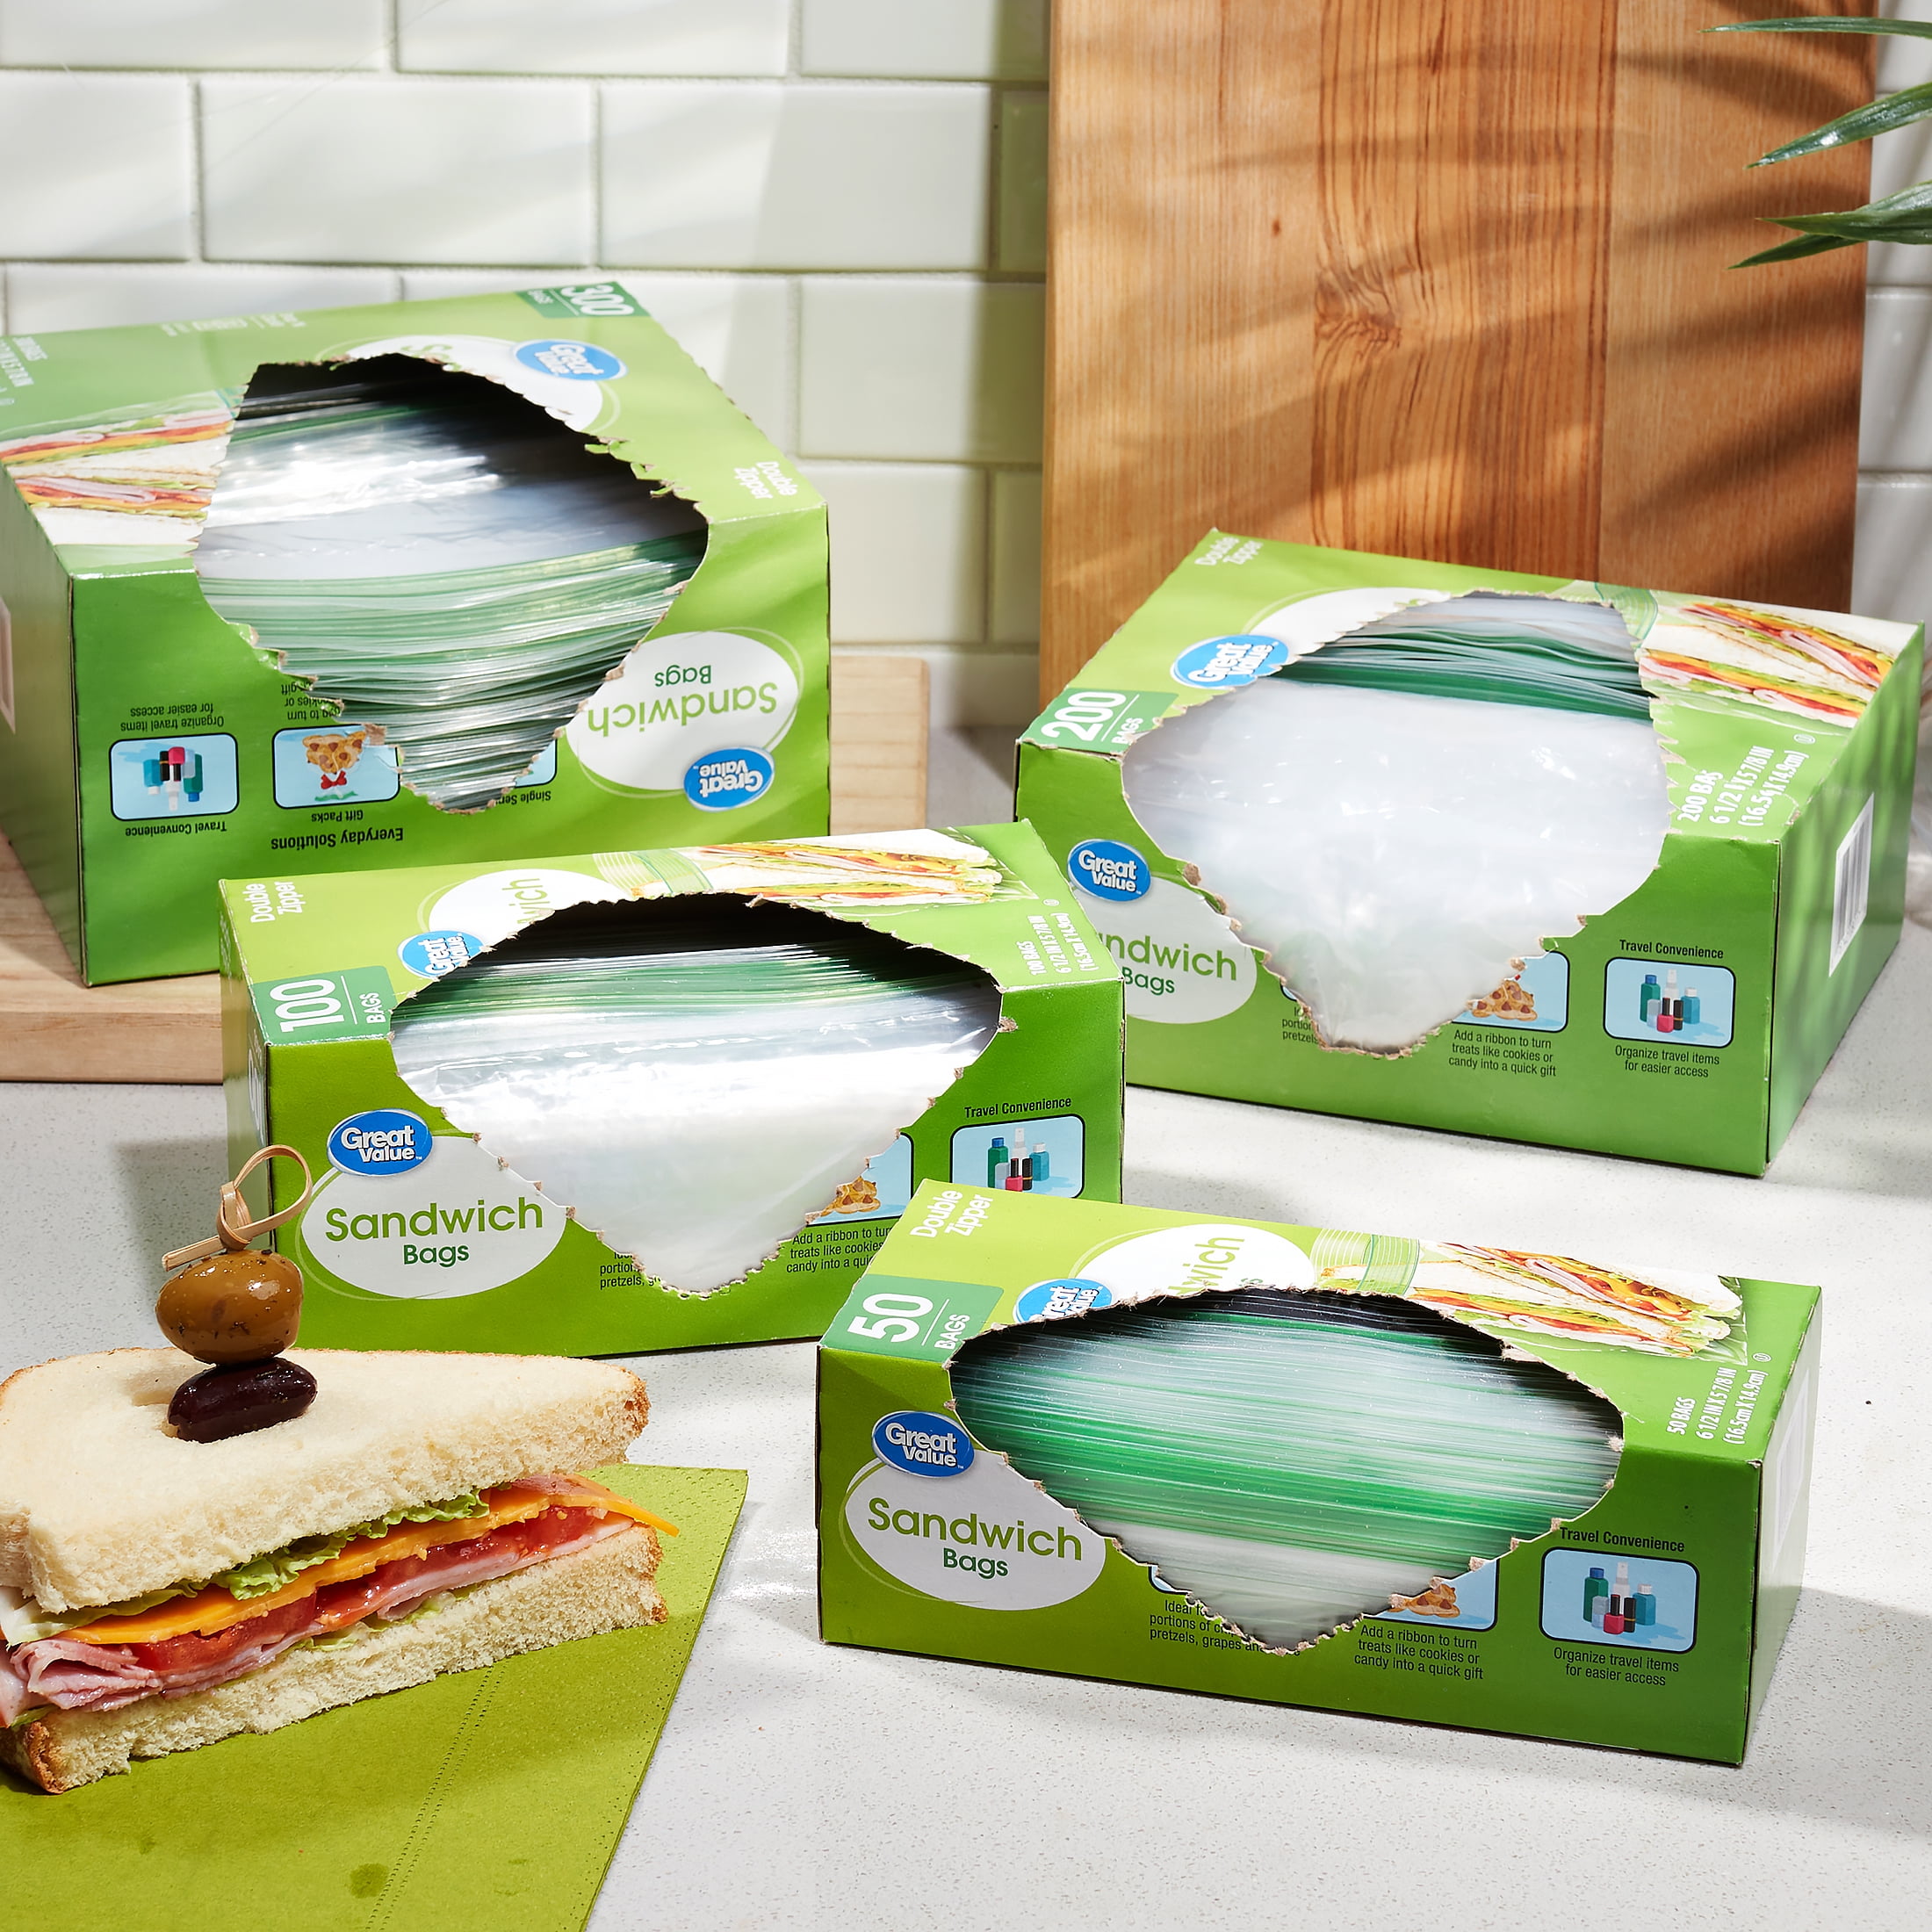 PAMI Double Zip Sandwich Bag [100 Pieces] - Leakproof Freshness-Lock  Sandwich Bags With Food-Safe Zipper Storage Bags For Sandwiches, Snacks,  Fruits 